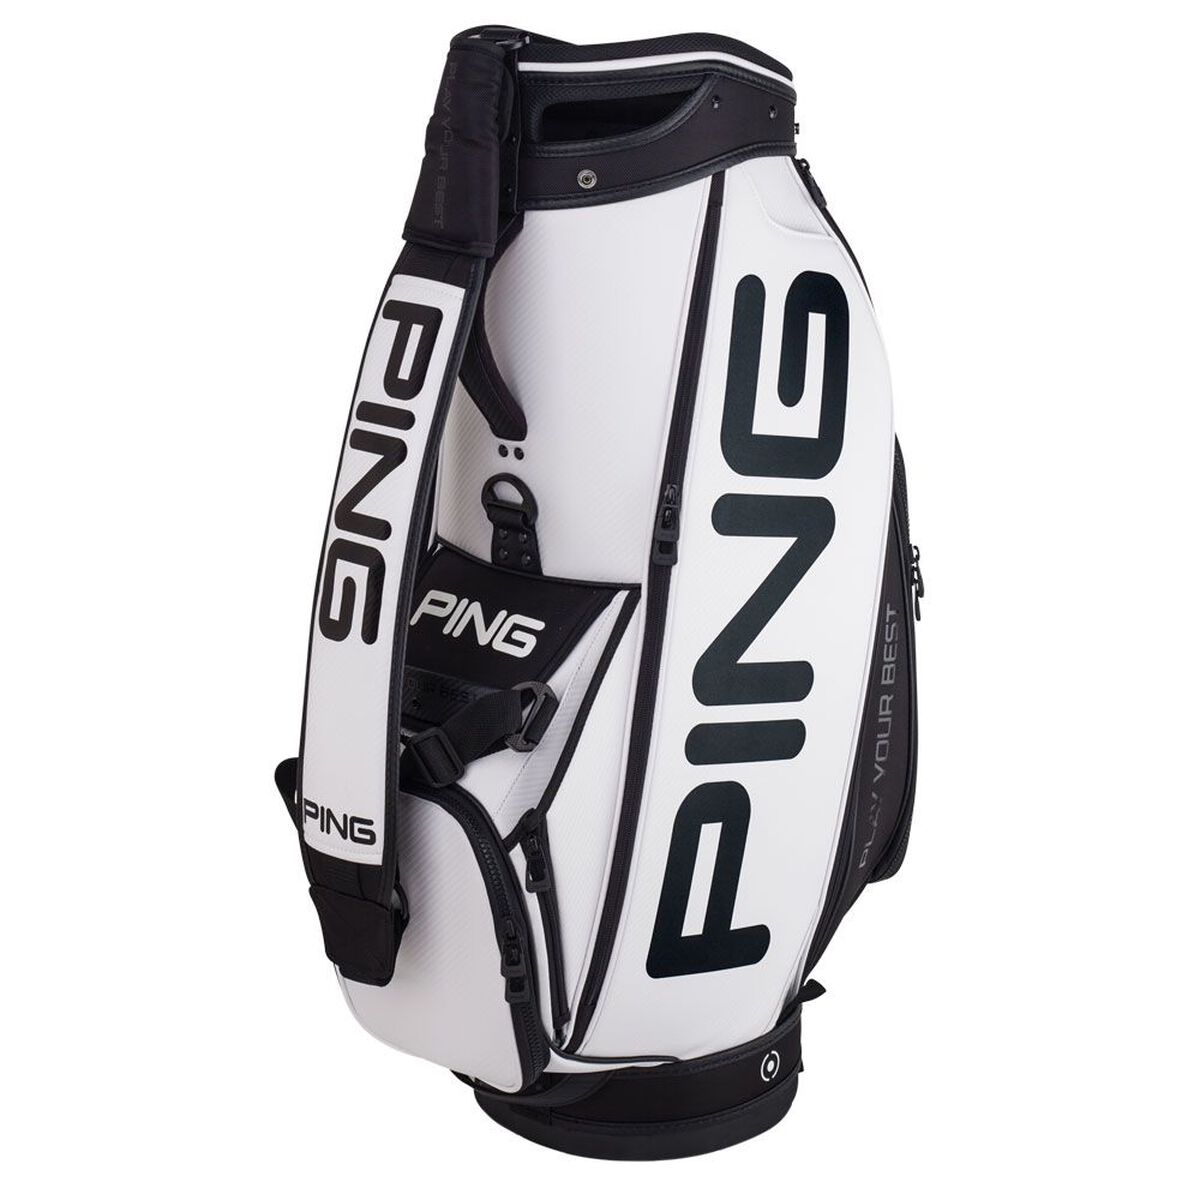 Ping White and Black Tour Golf Staff Bag | American Golf, One Size von Ping